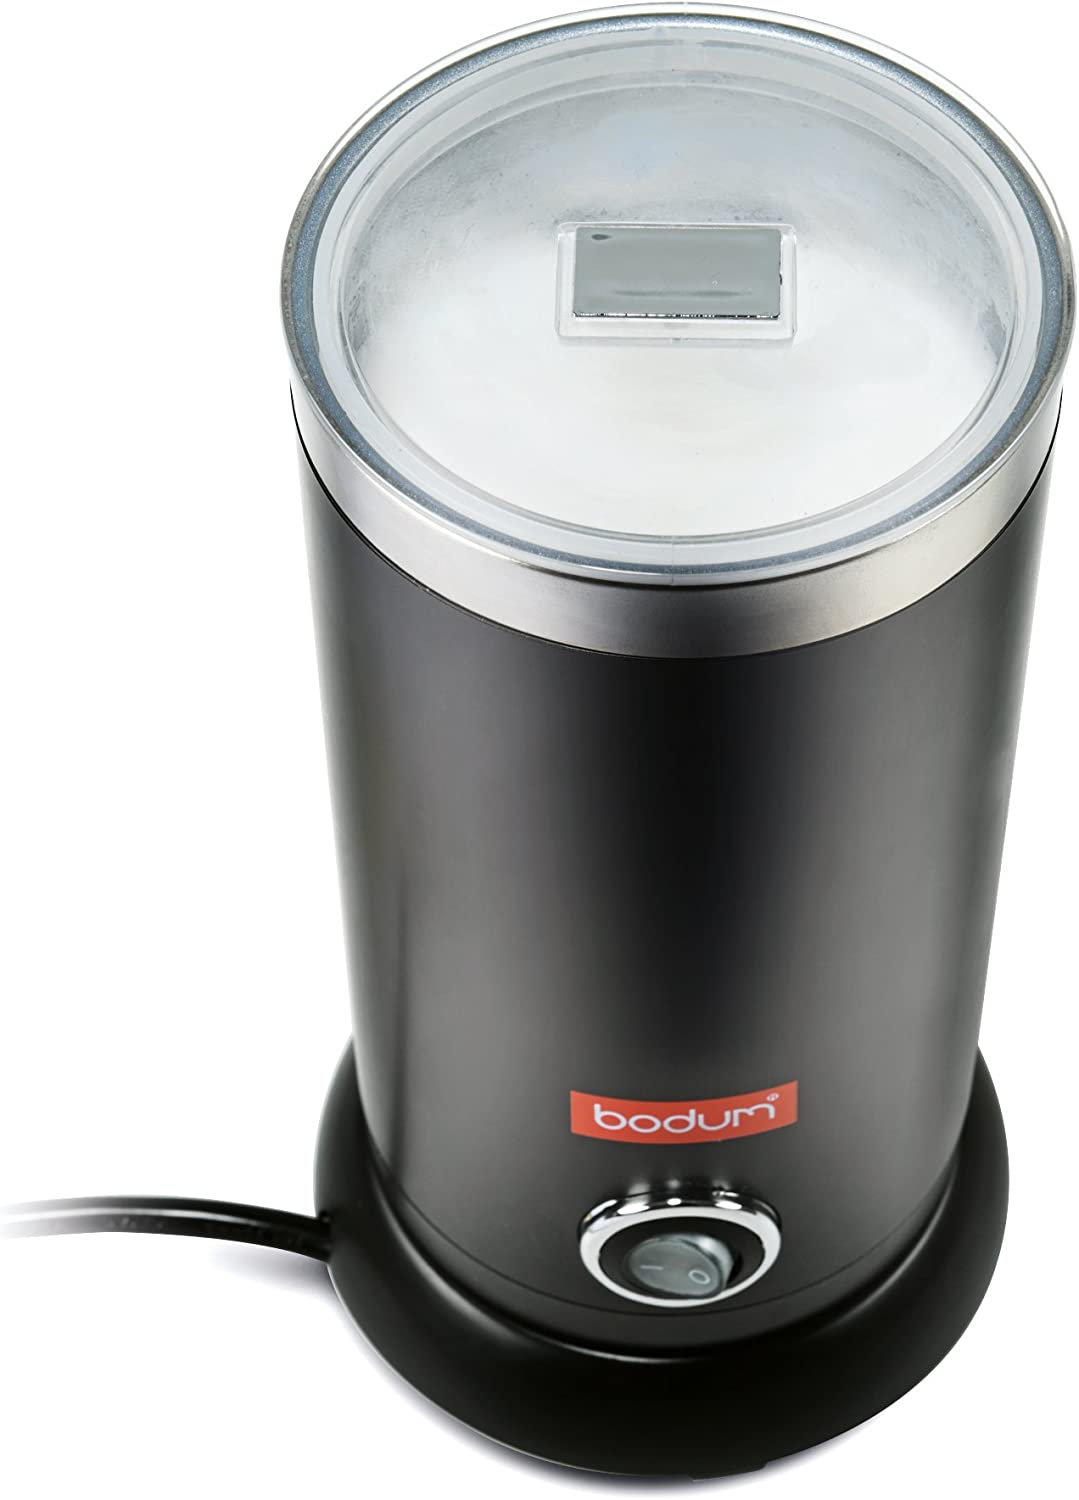 INSTANT POT ELECTRIC MILK FROTHER: FULL REVIEW! Is this